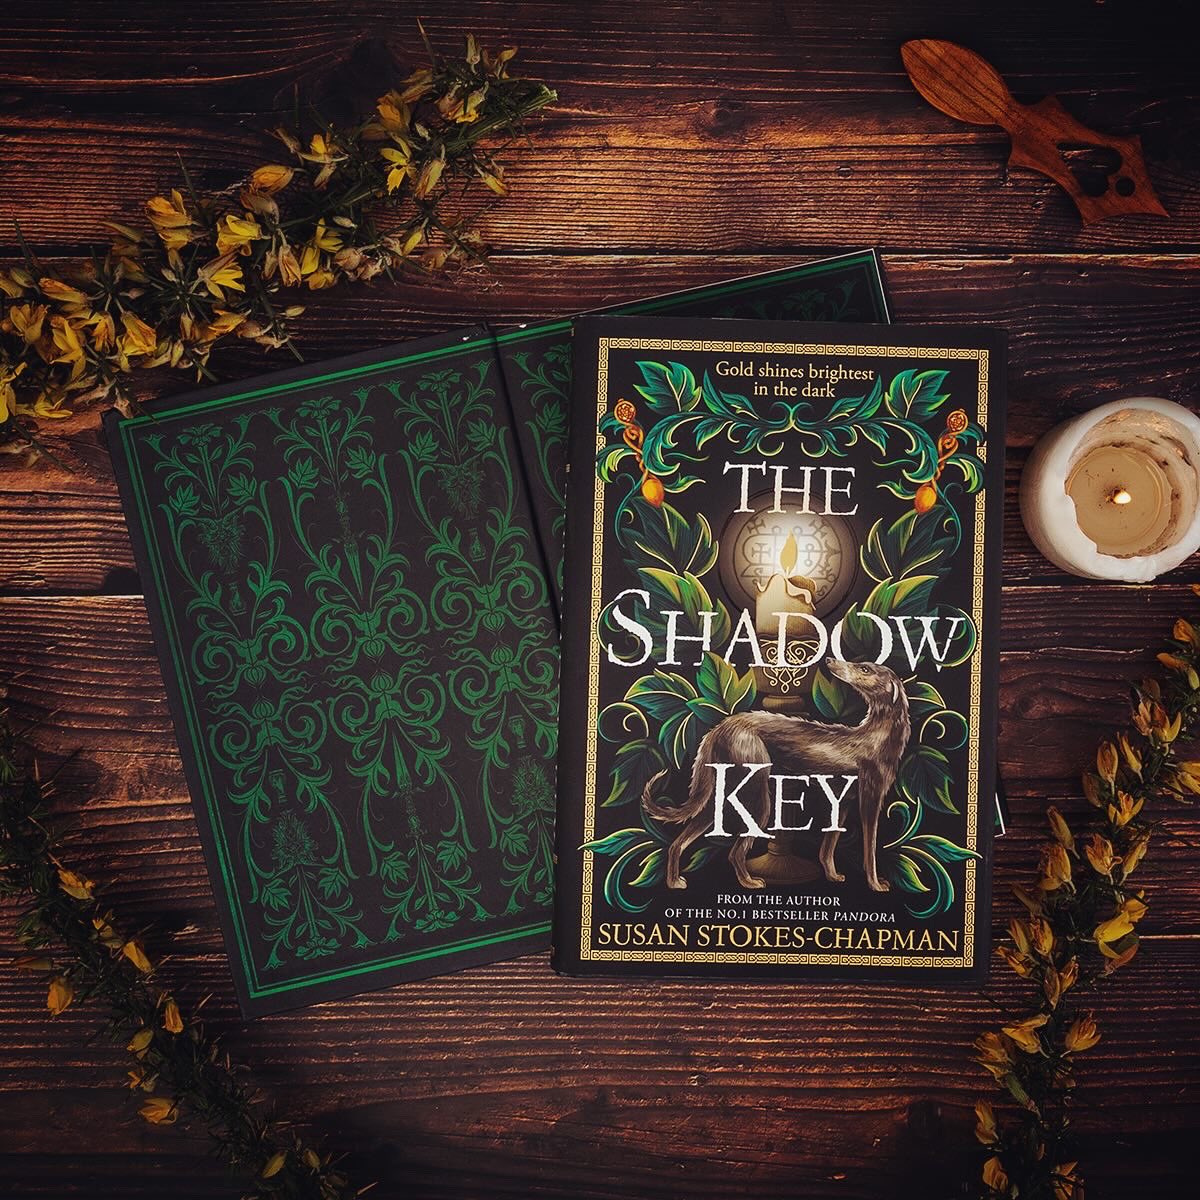 It’s publication day for THE SHADOW KEY! Apologies in advance for spamming the heck out of your timeline today but this darkling Welsh 🏴󠁧󠁢󠁷󠁬󠁳󠁿 novel of mine really does mean so much to me, and I’m proud of it for so many reasons. Go forth into the world my Gothic beastie! 🕯️🖤💀